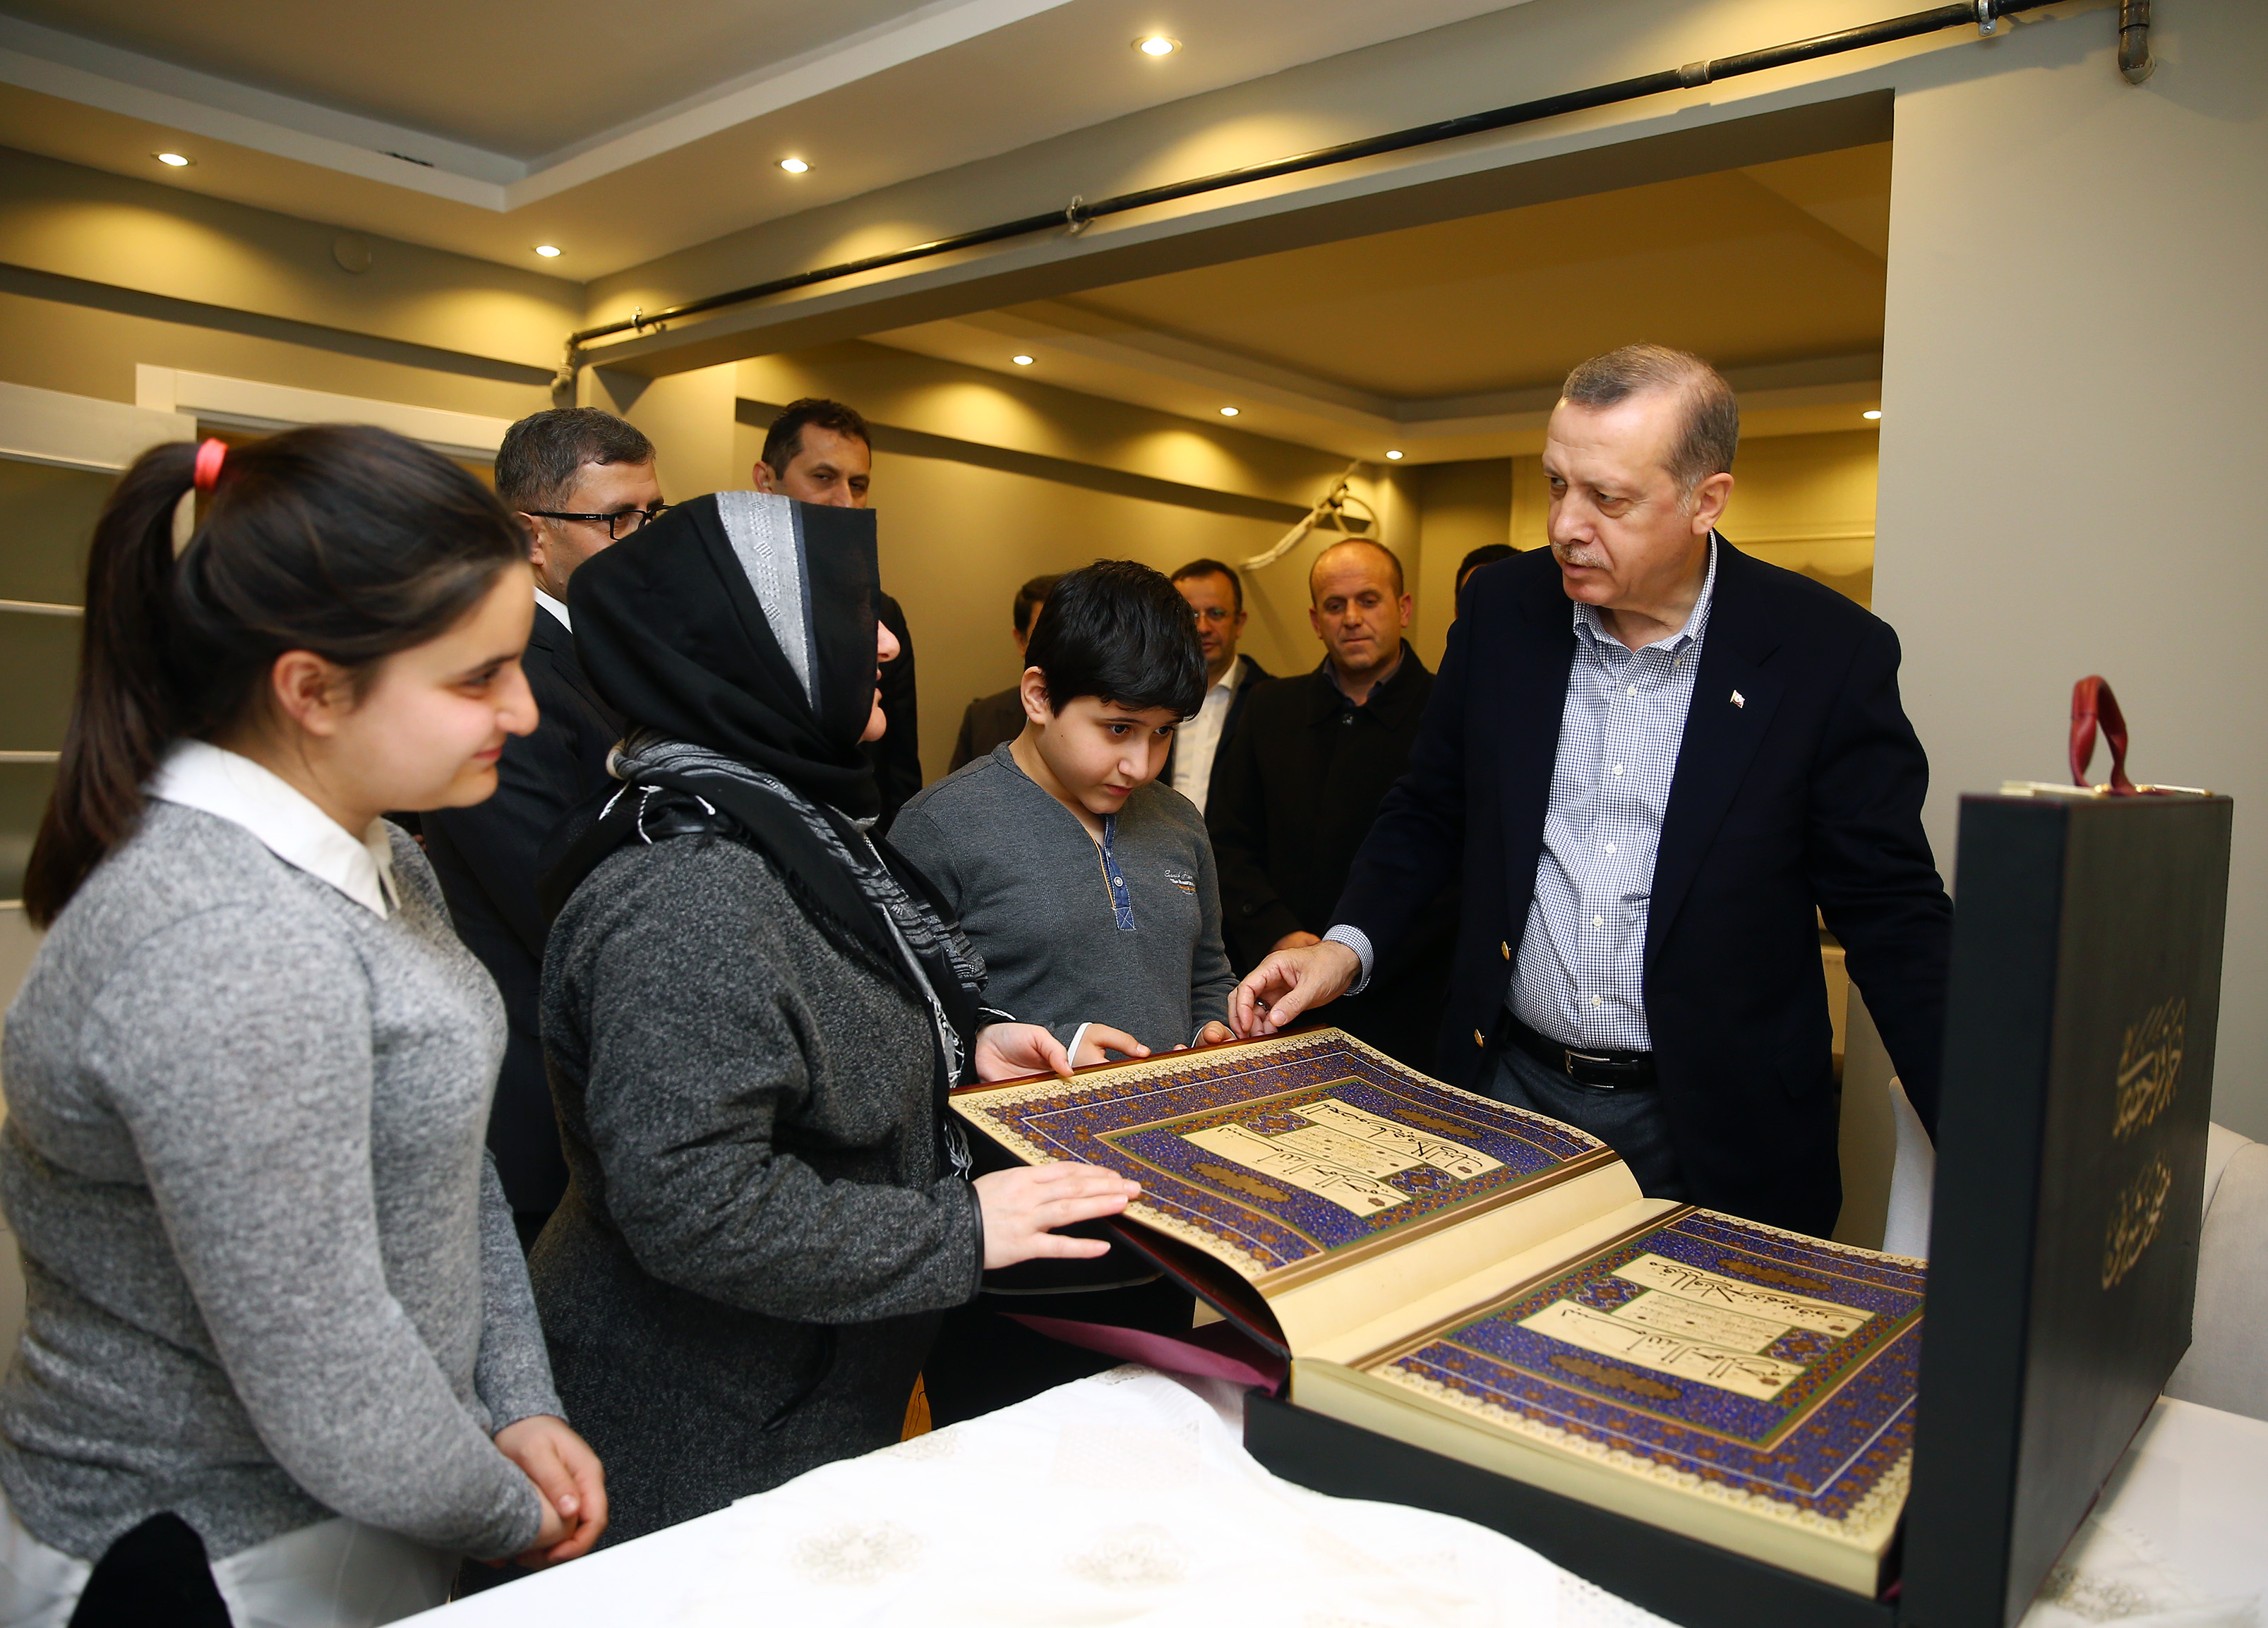 He presented a Quran as a gift to the martyr’s family.